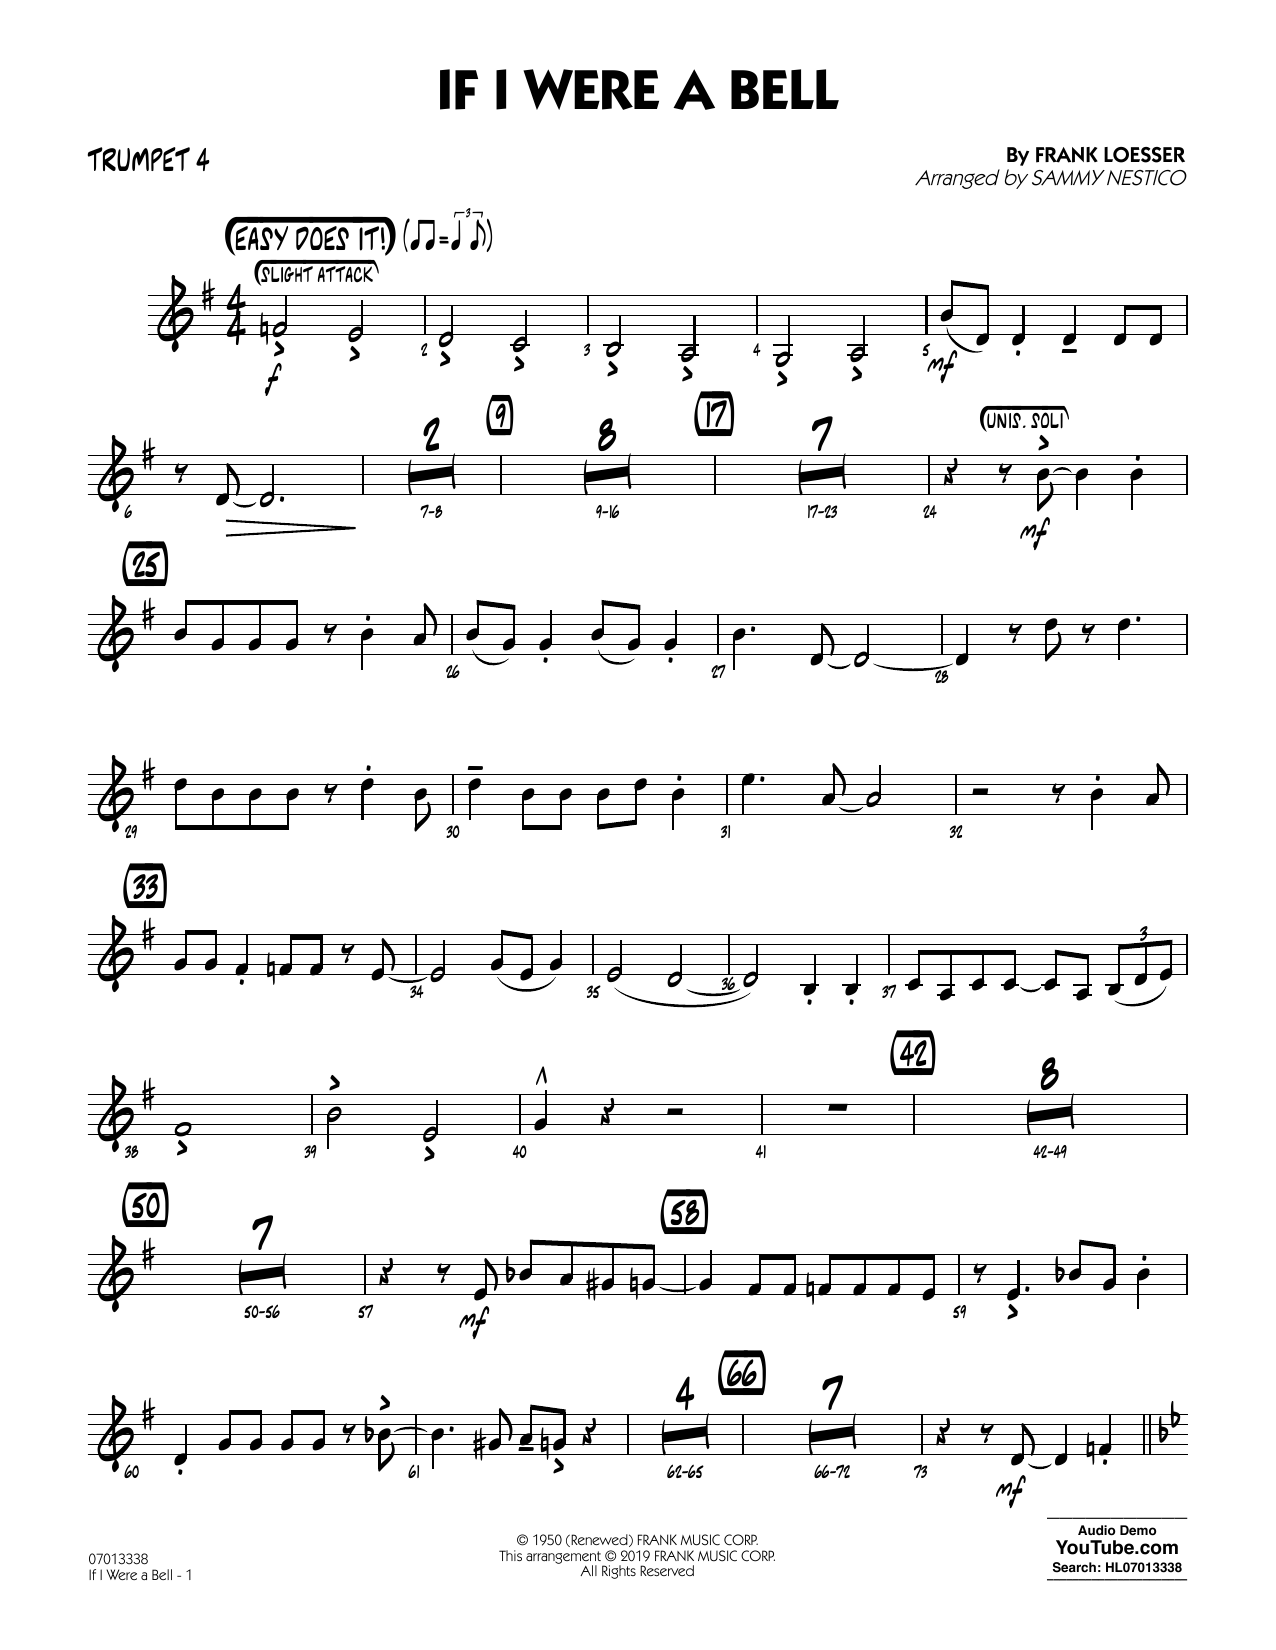 Frank Loesser If I Were a Bell (arr. Sammy Nestico) - Trumpet 4 sheet music preview music notes and score for Jazz Ensemble including 2 page(s)